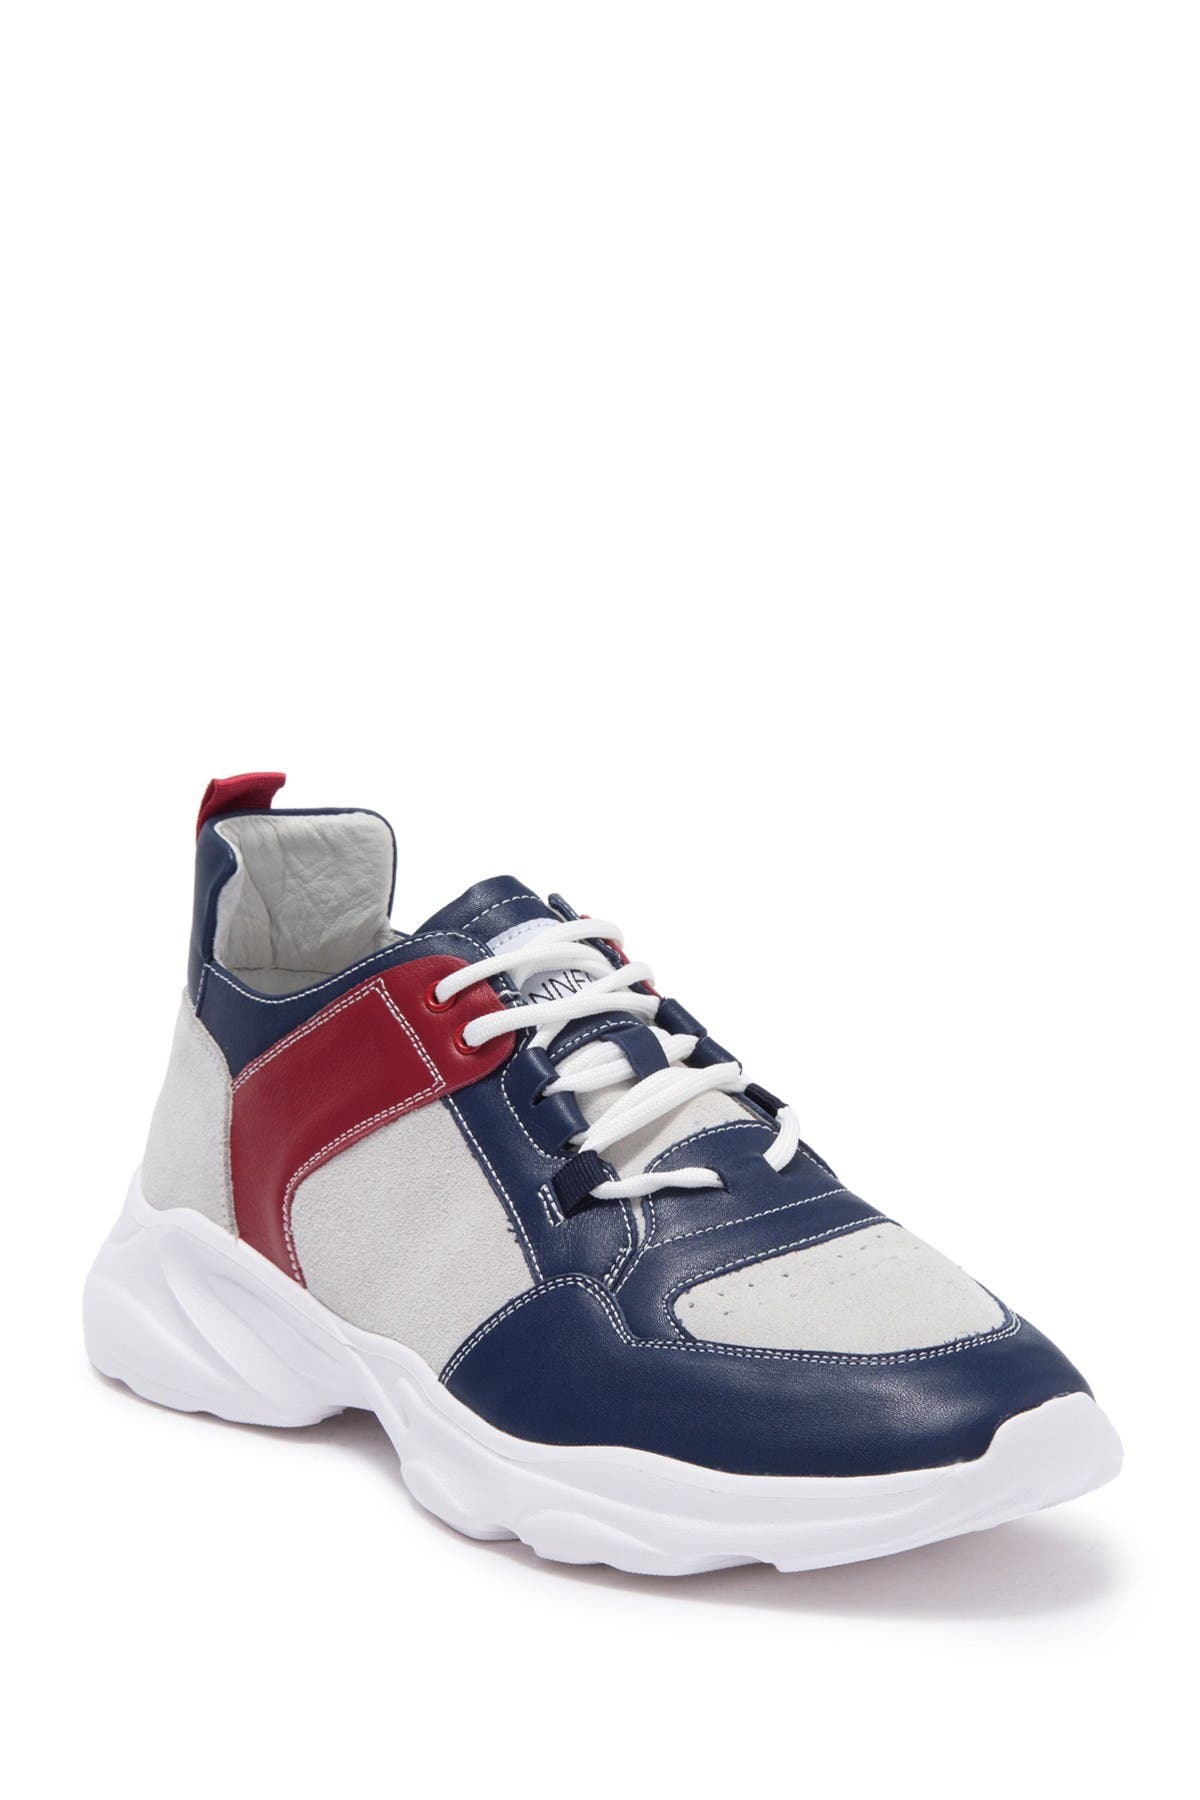 French Connection Monte Leather Lifestyle Sneaker In Blue